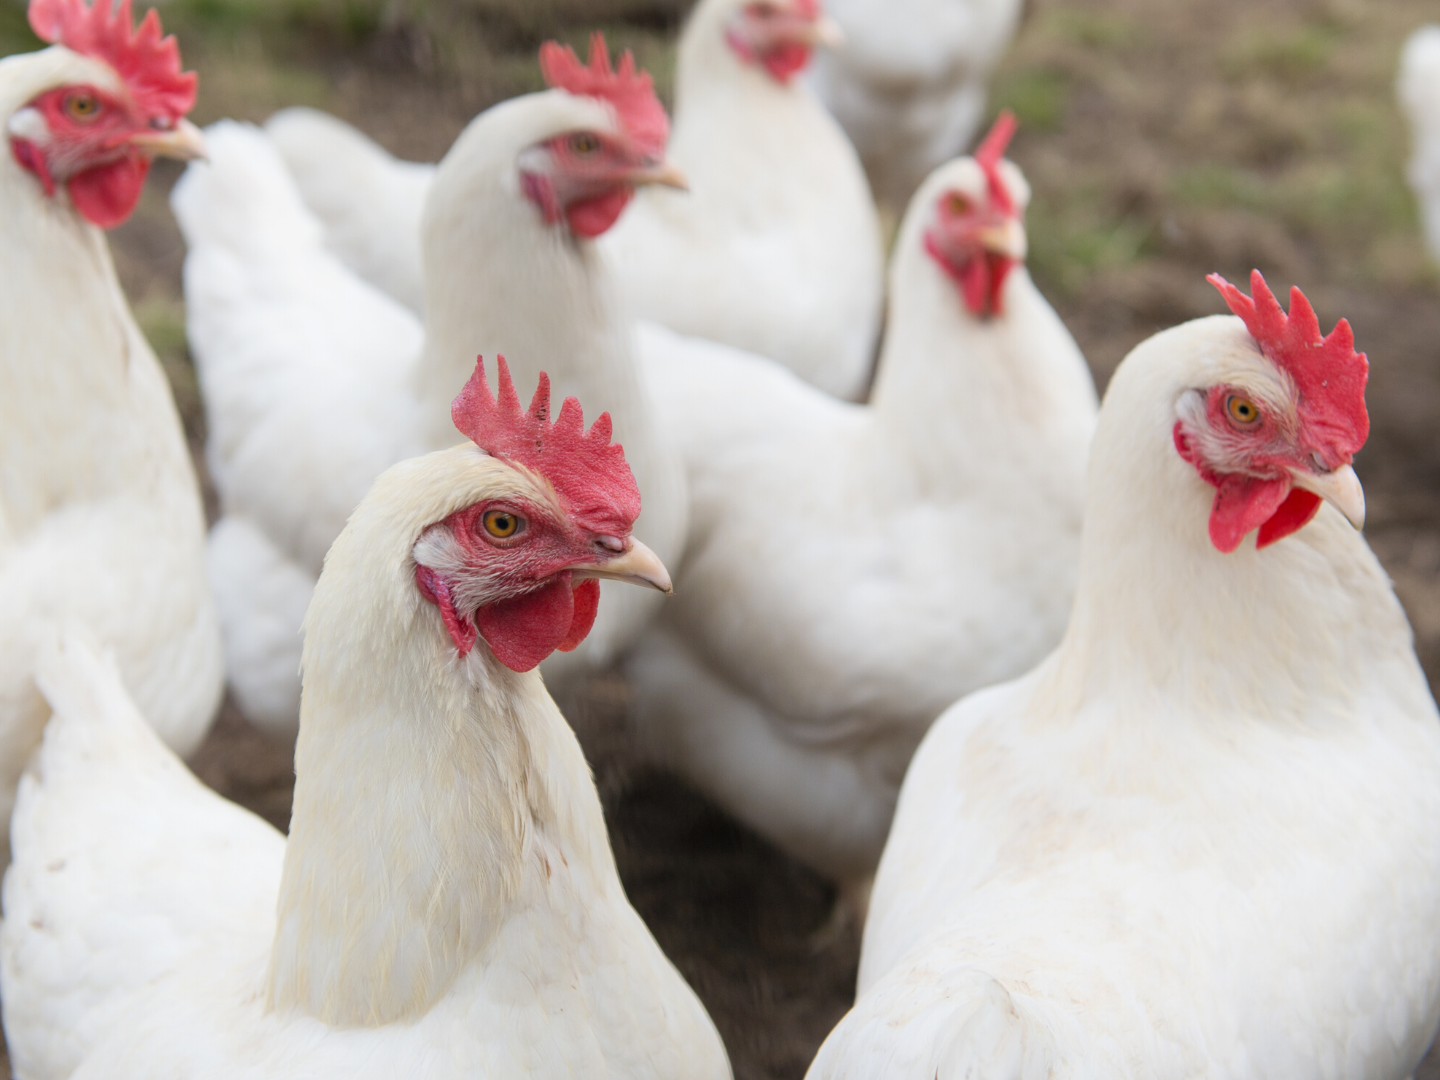 Two Million Chickens To Be Slaughtered Due To Lack of Workers